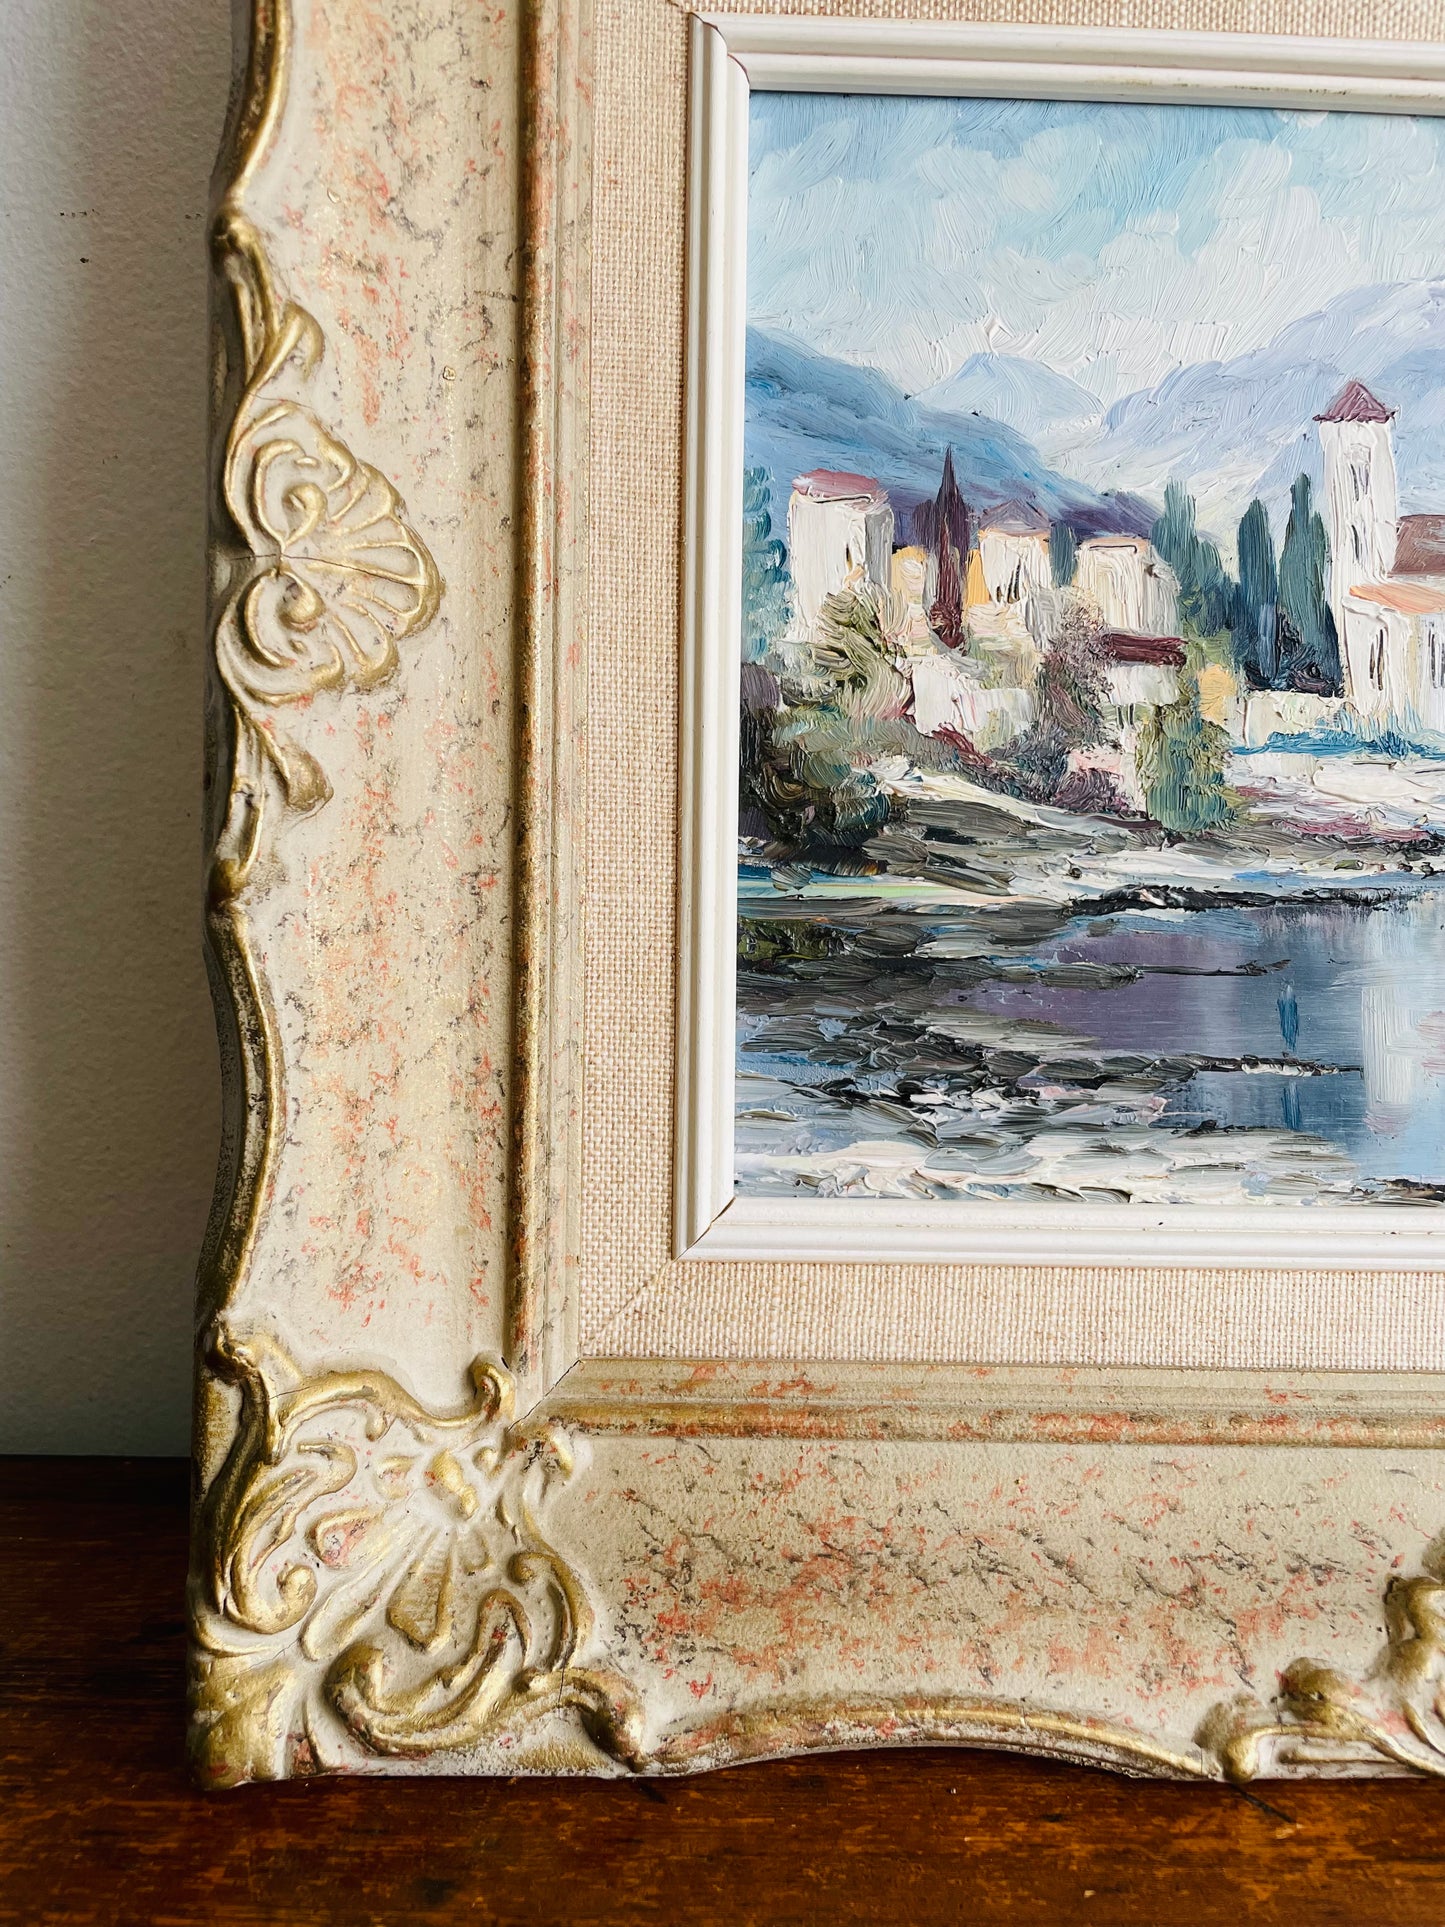 Original Art - Painting of European Village on Water - Signed by Listed Artist Heinz L. Koller